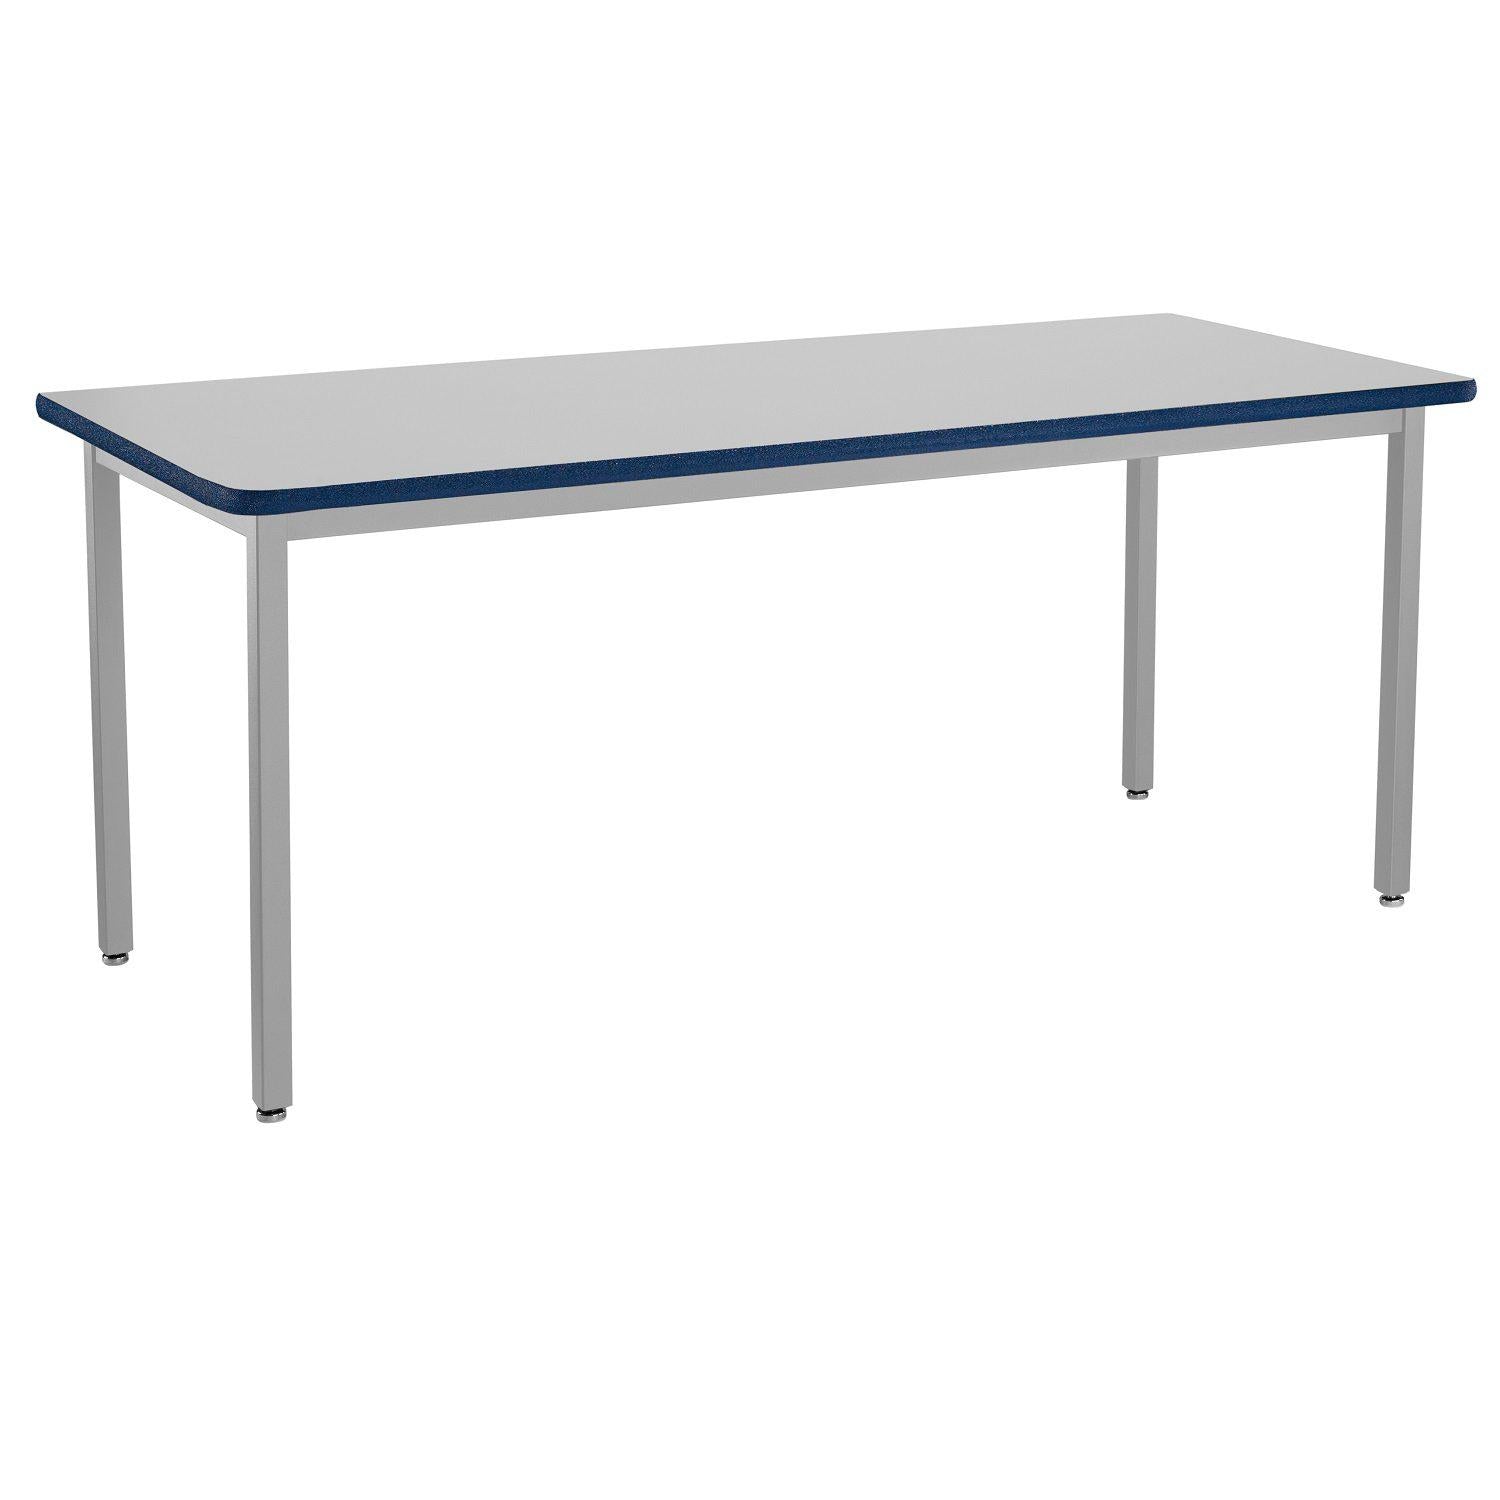 Heavy-Duty Fixed Height Utility Table, Soft Grey Frame, 30" x 96", Supreme High-Pressure Laminate Top with Black ProtectEdge